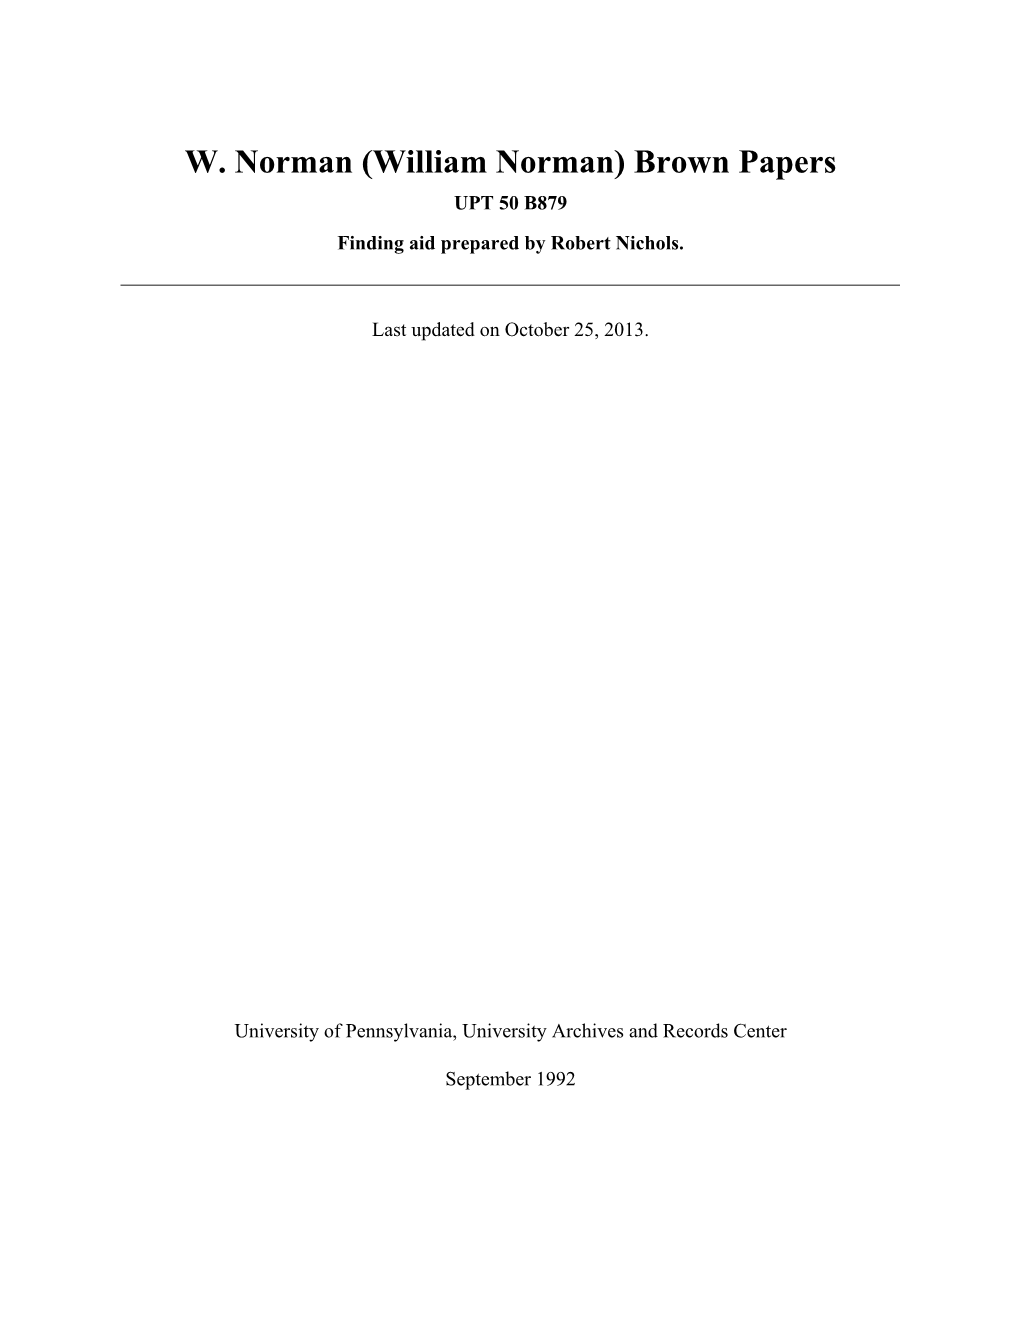 William Norman) Brown Papers UPT 50 B879 Finding Aid Prepared by Robert Nichols